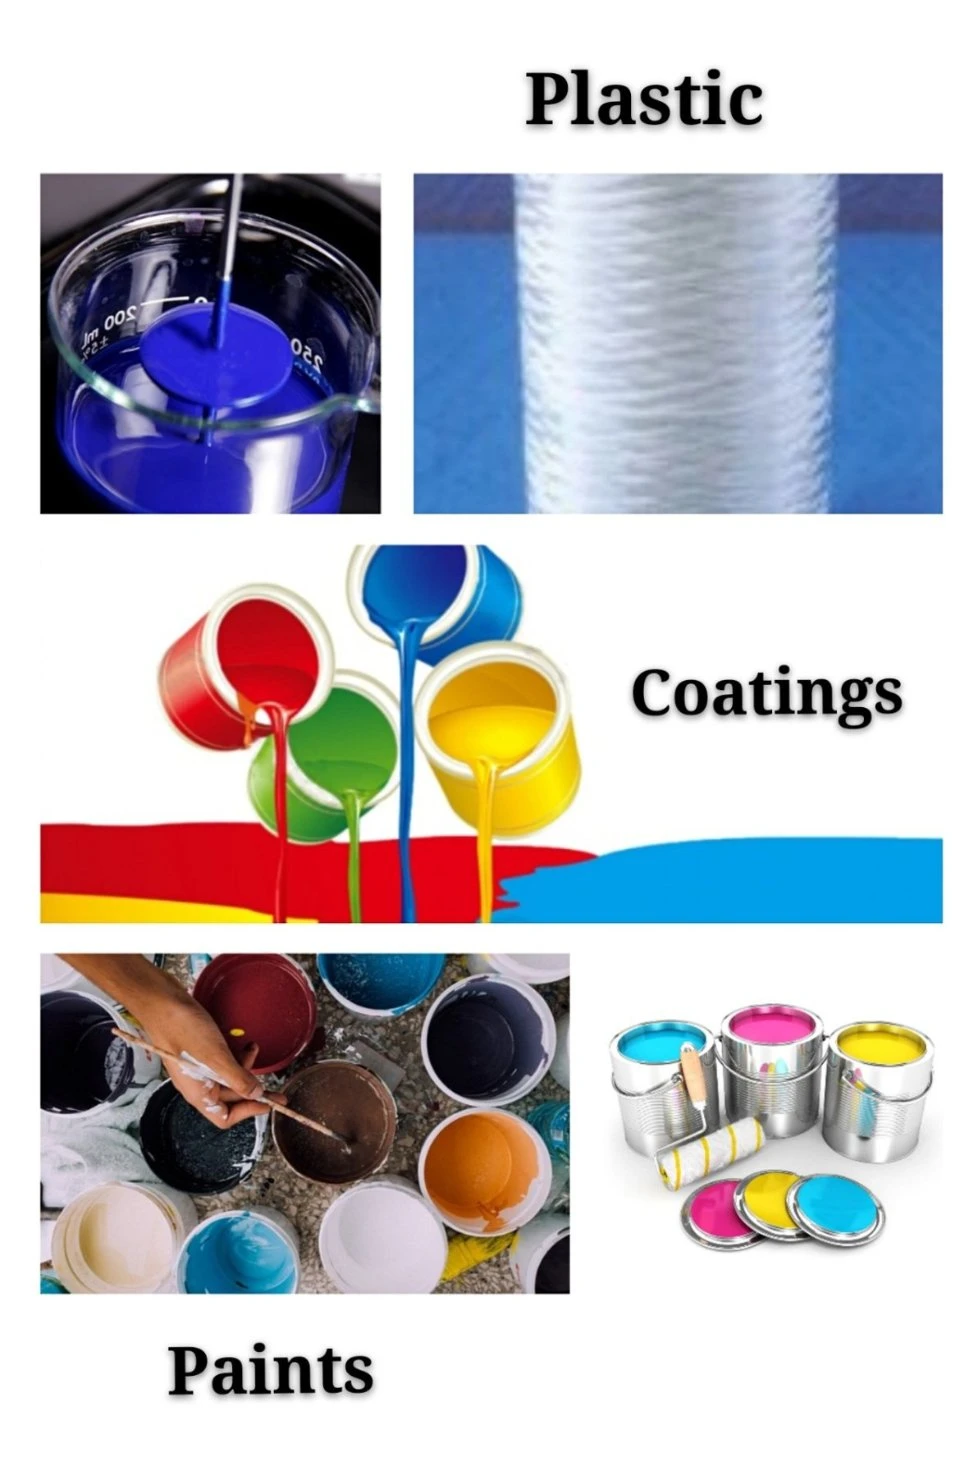 Titanium Product/Chemical for Water Base Paint and Oil Based Paint